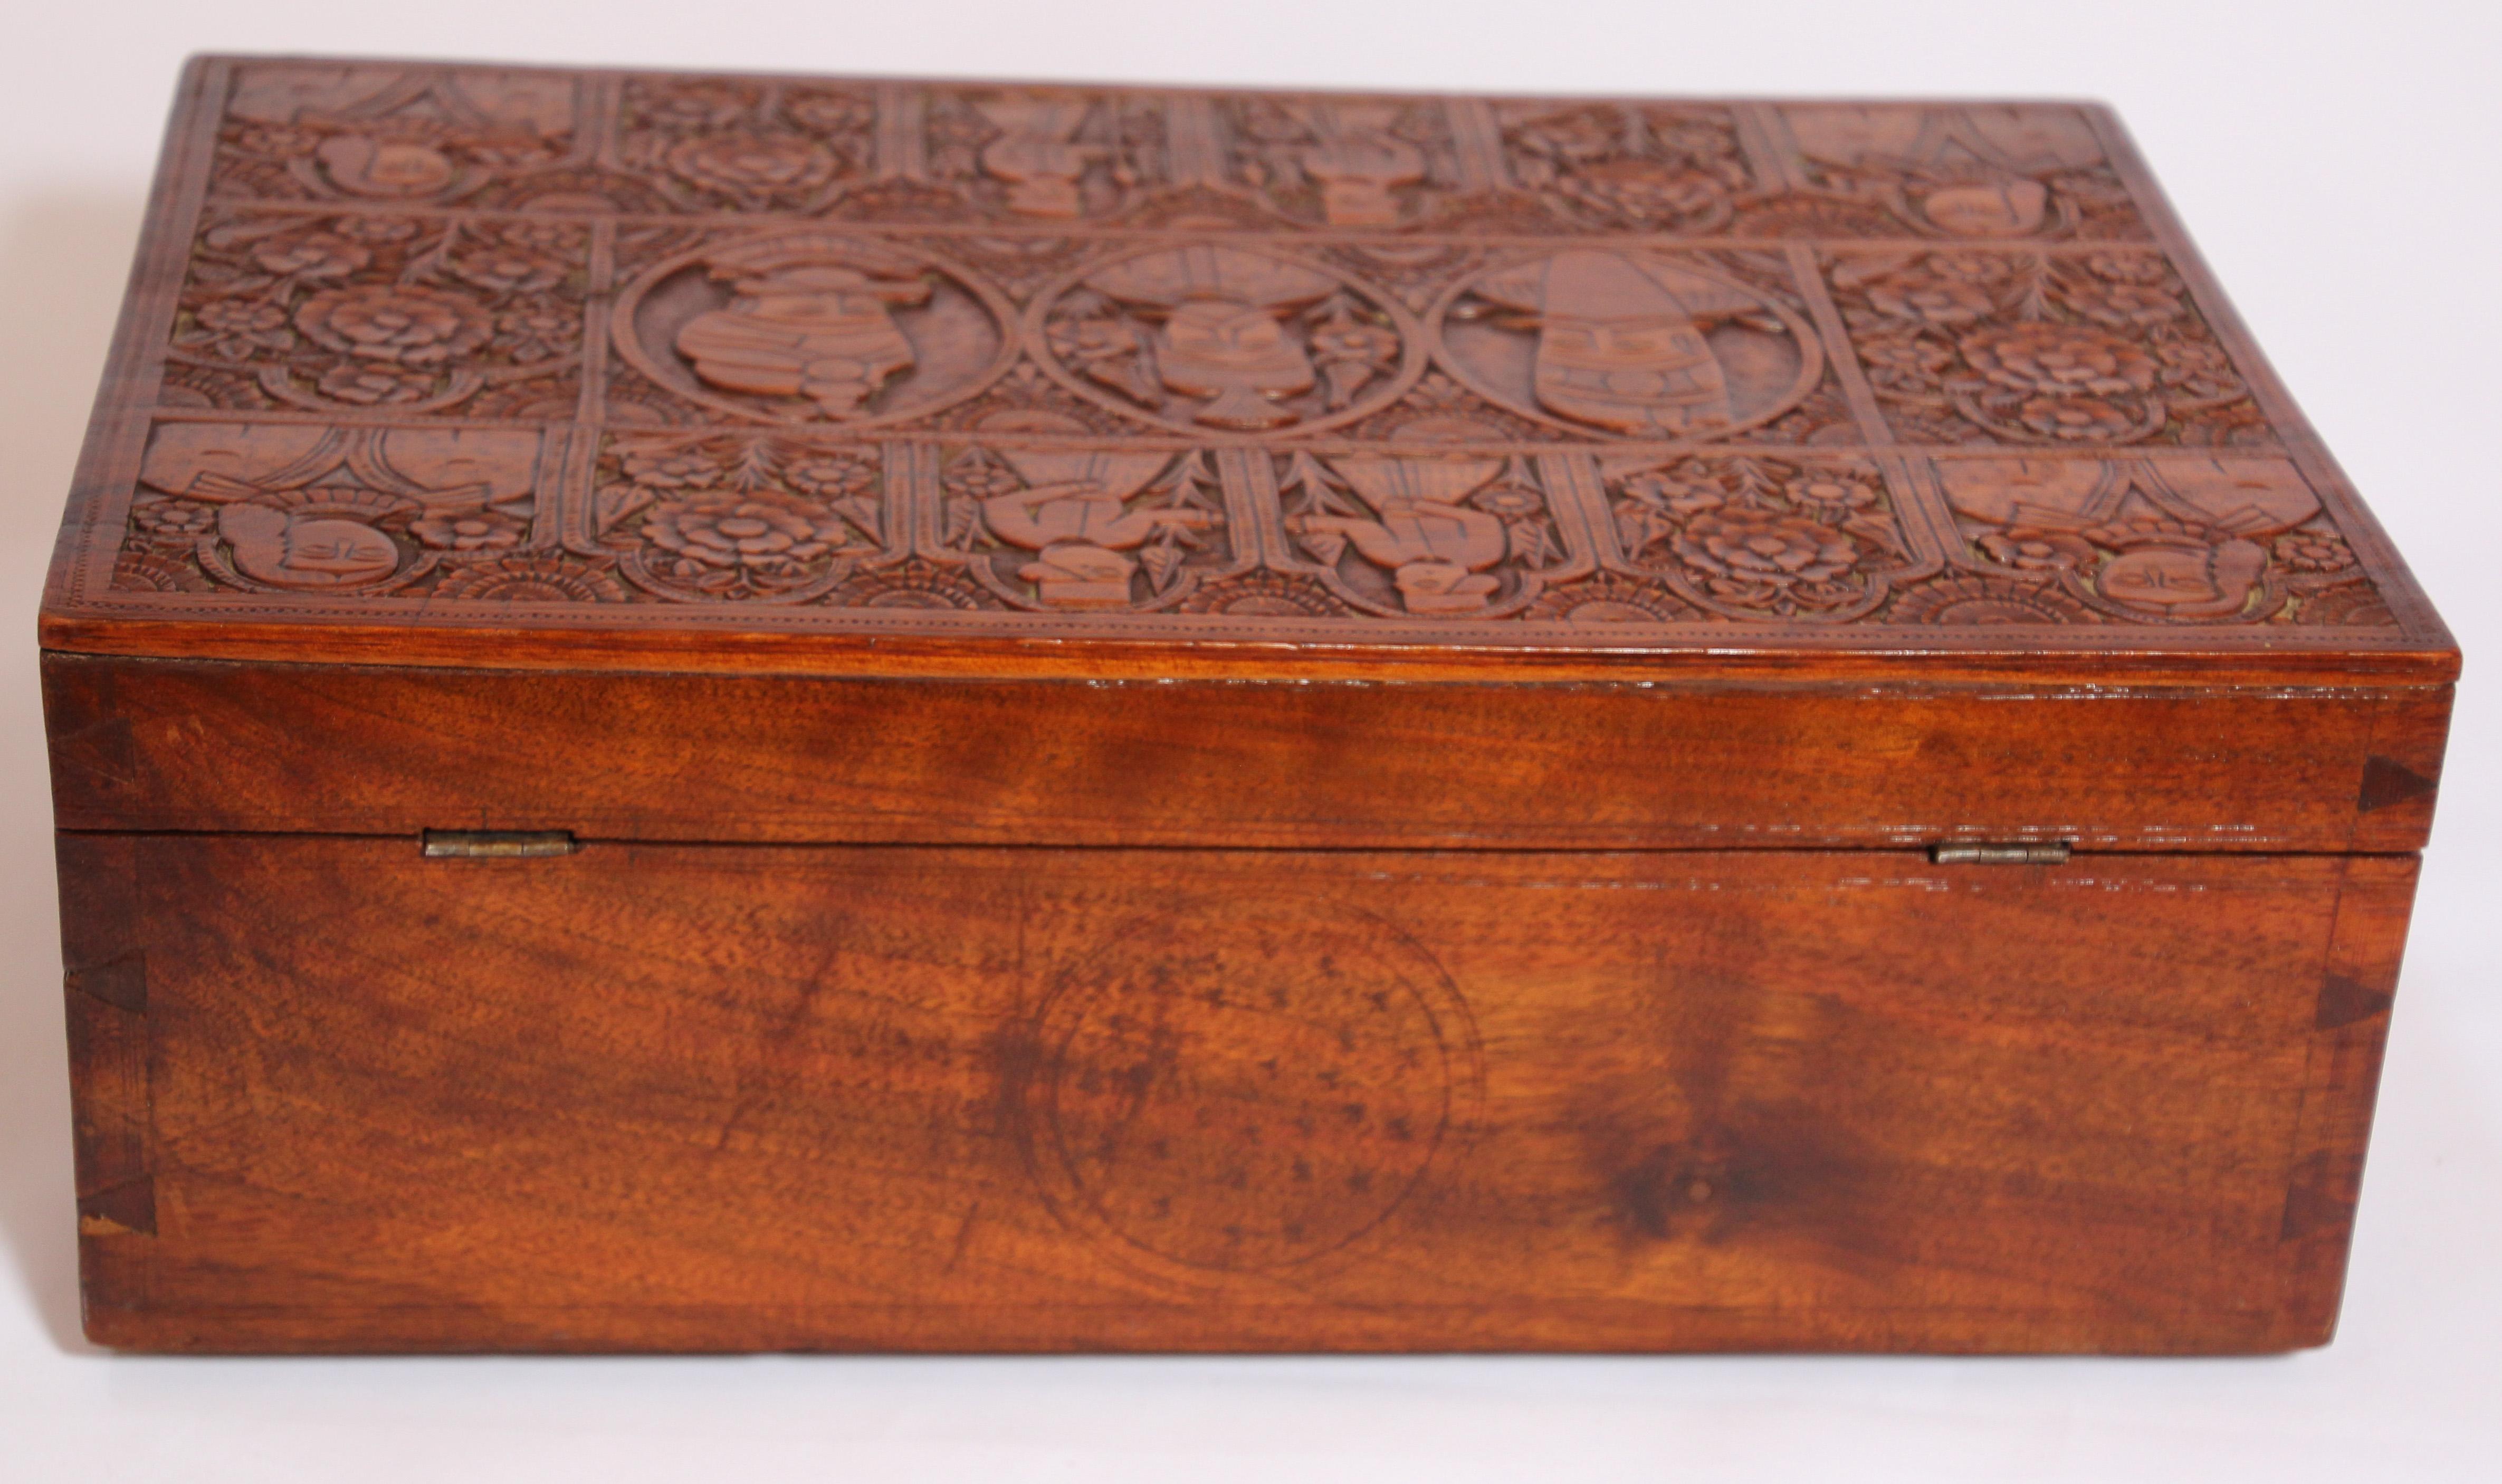 Large Early 19th Century Antique Hand Carved Wooden Mughal Decorative Box For Sale 9